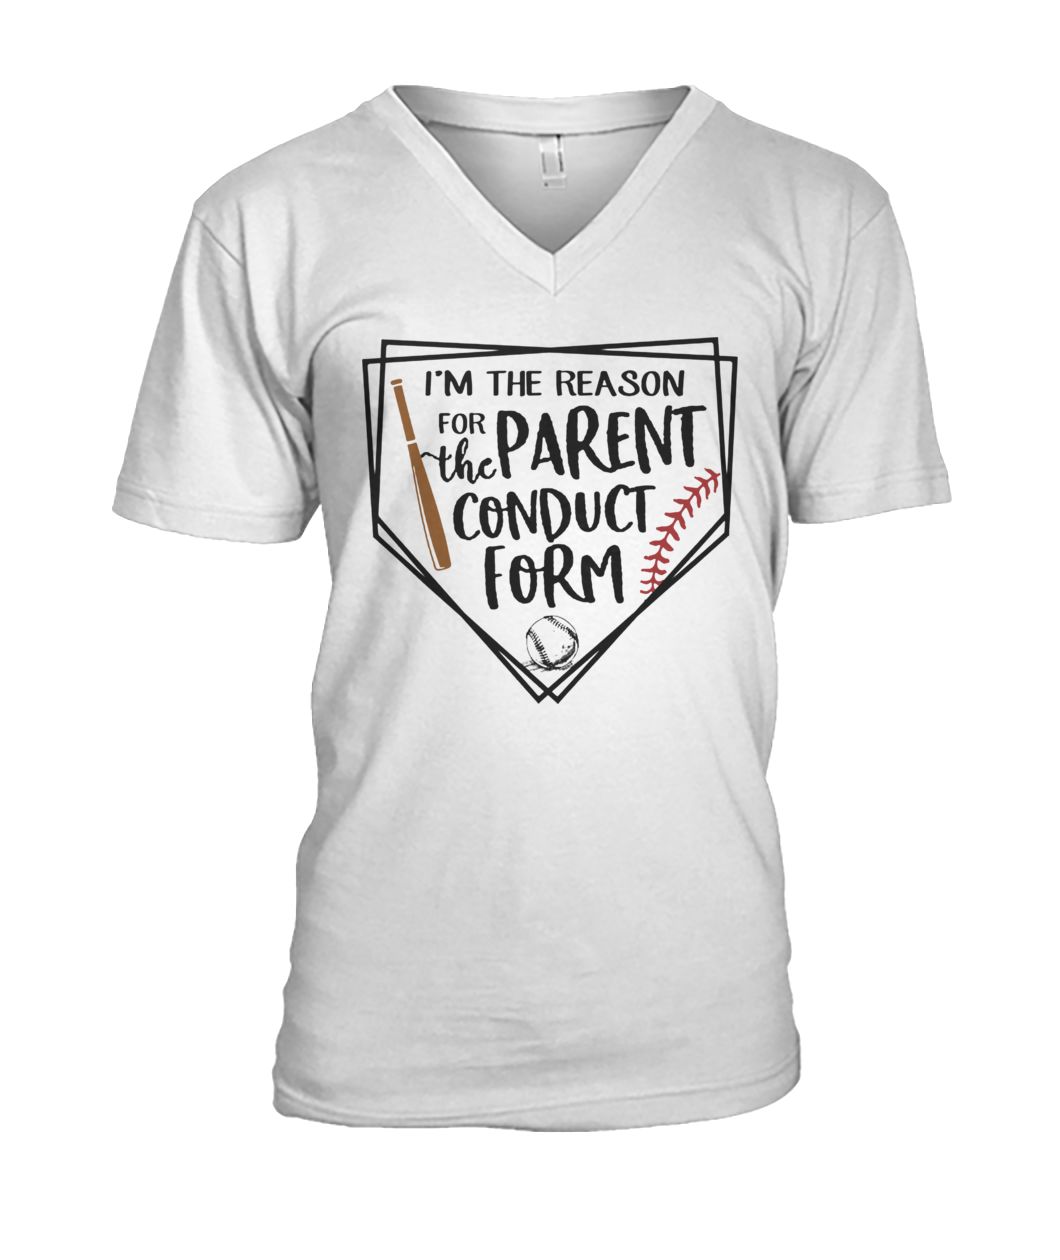 I'm the reason for the parent conduct form baseball mens v-neck